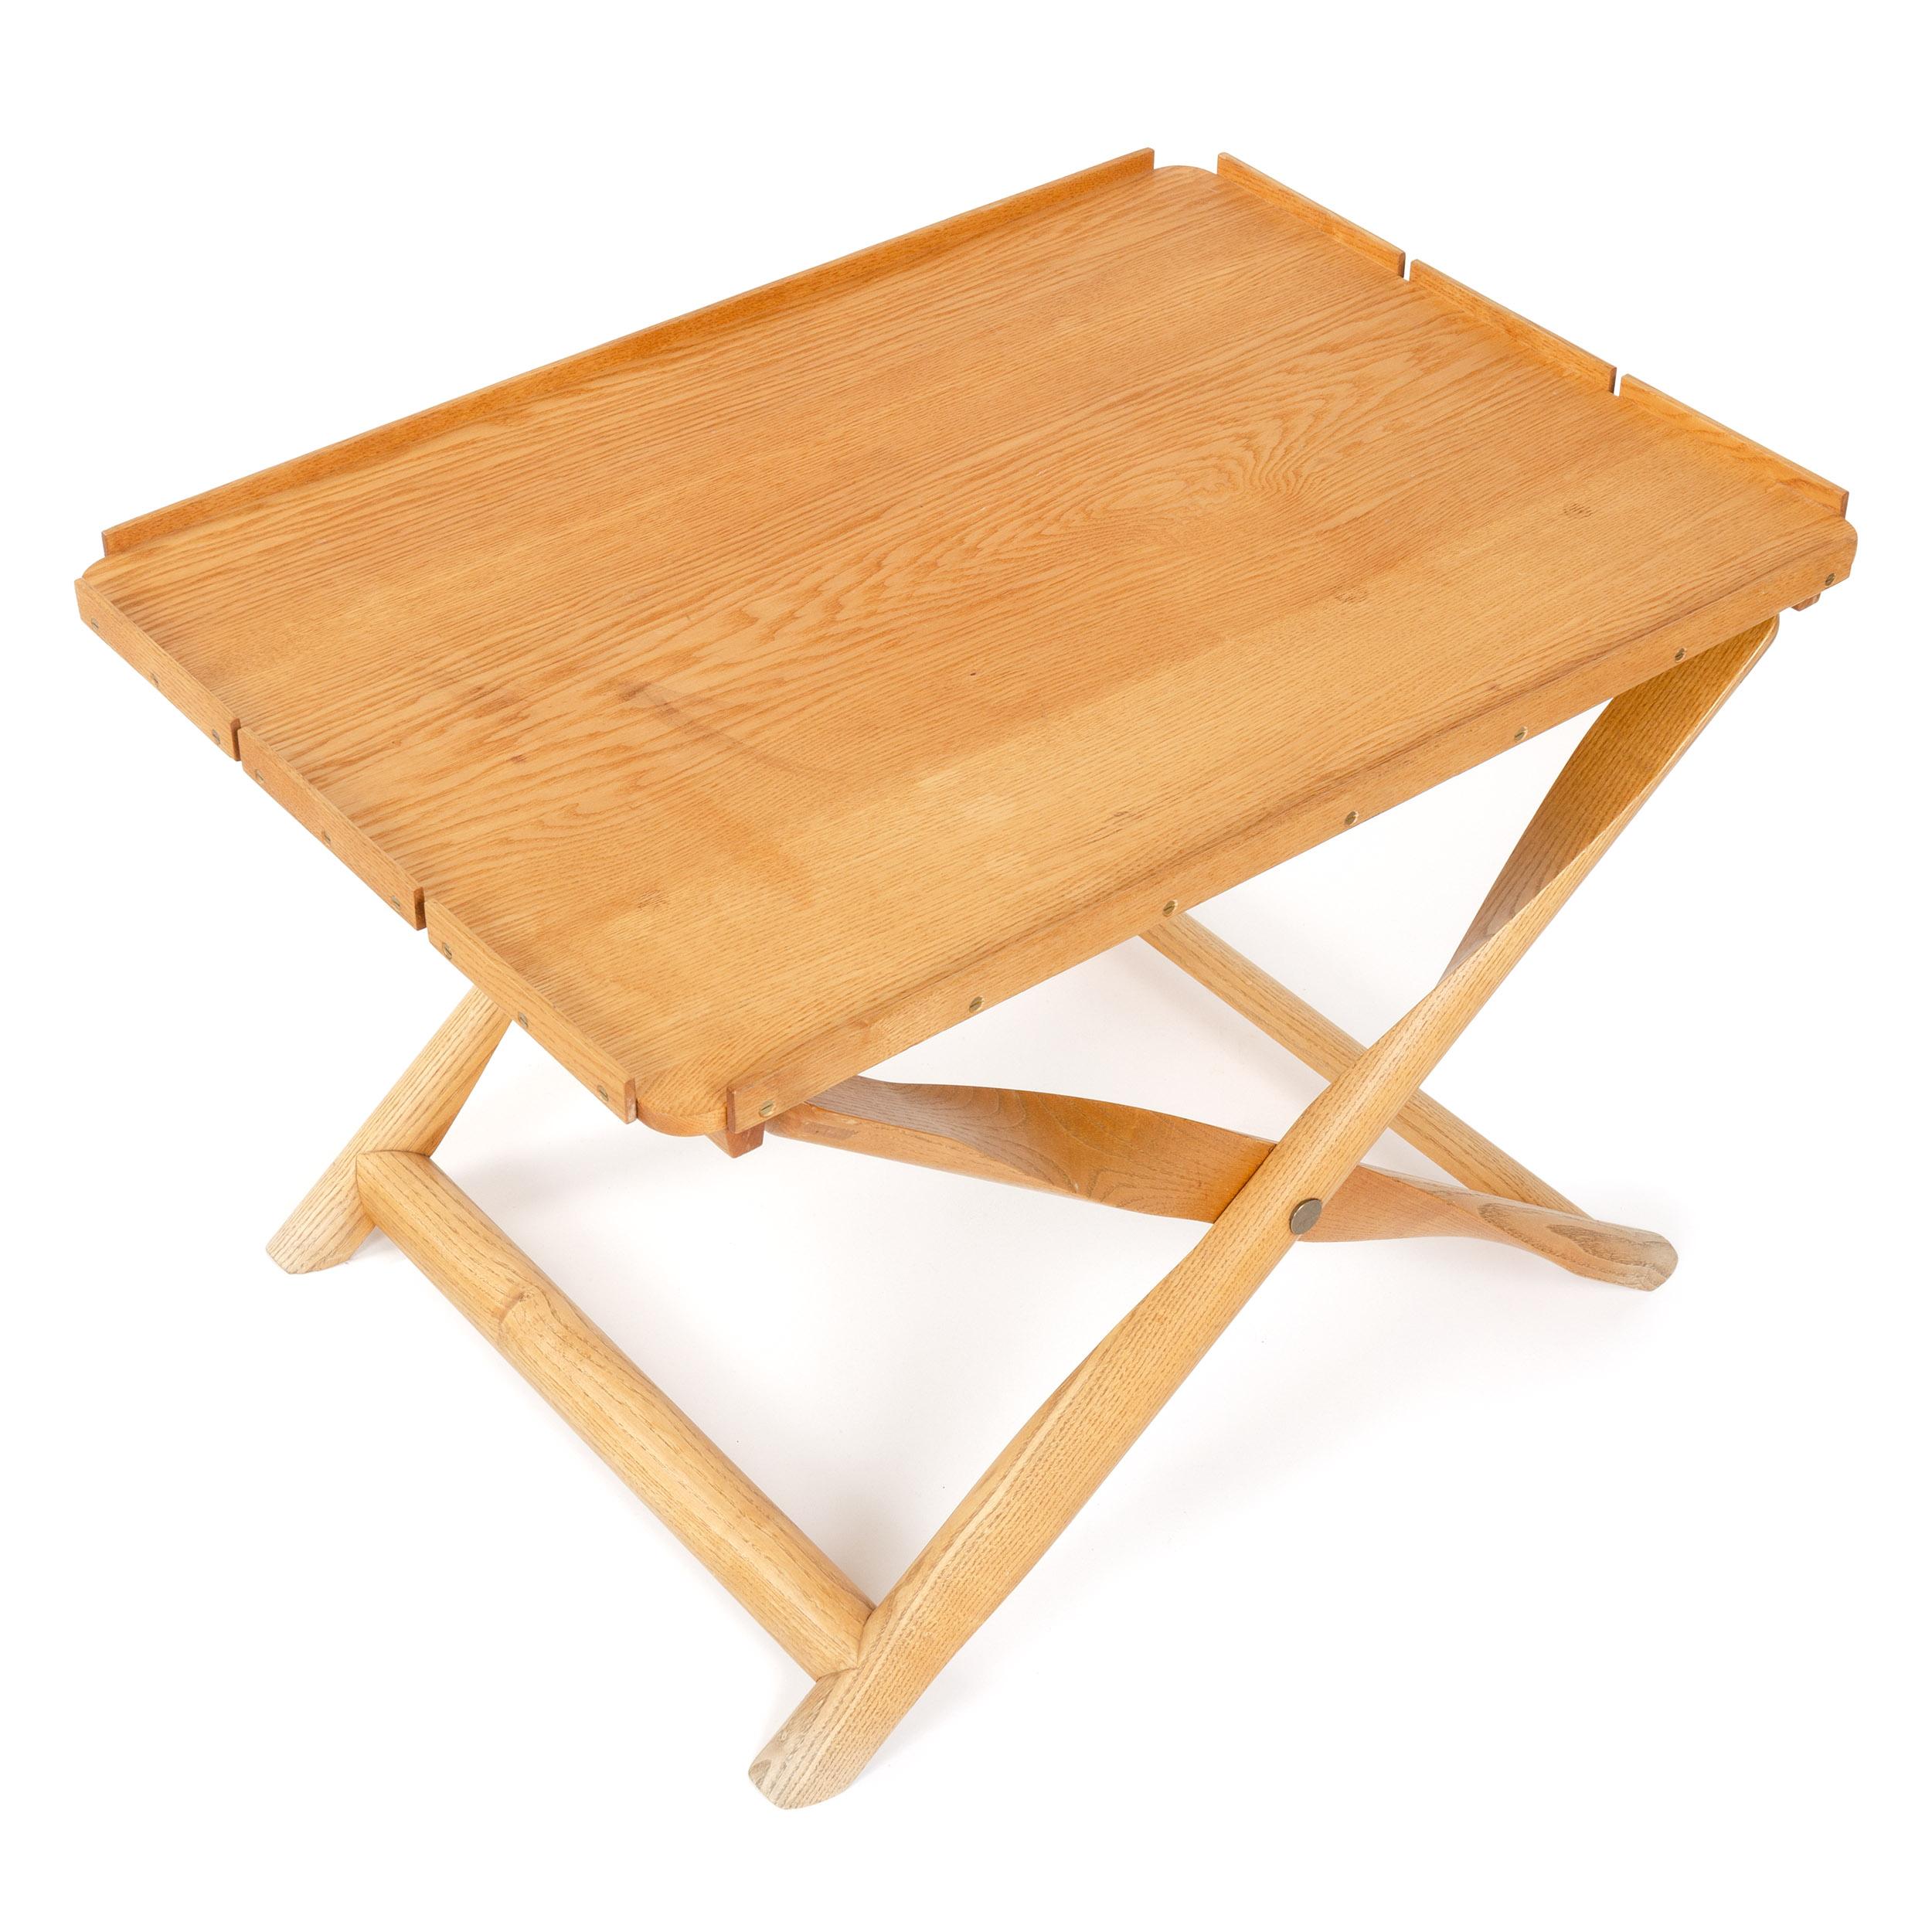 A rare folding ash “propeller” stool or table with a canvas sling supporting a removable tray top.